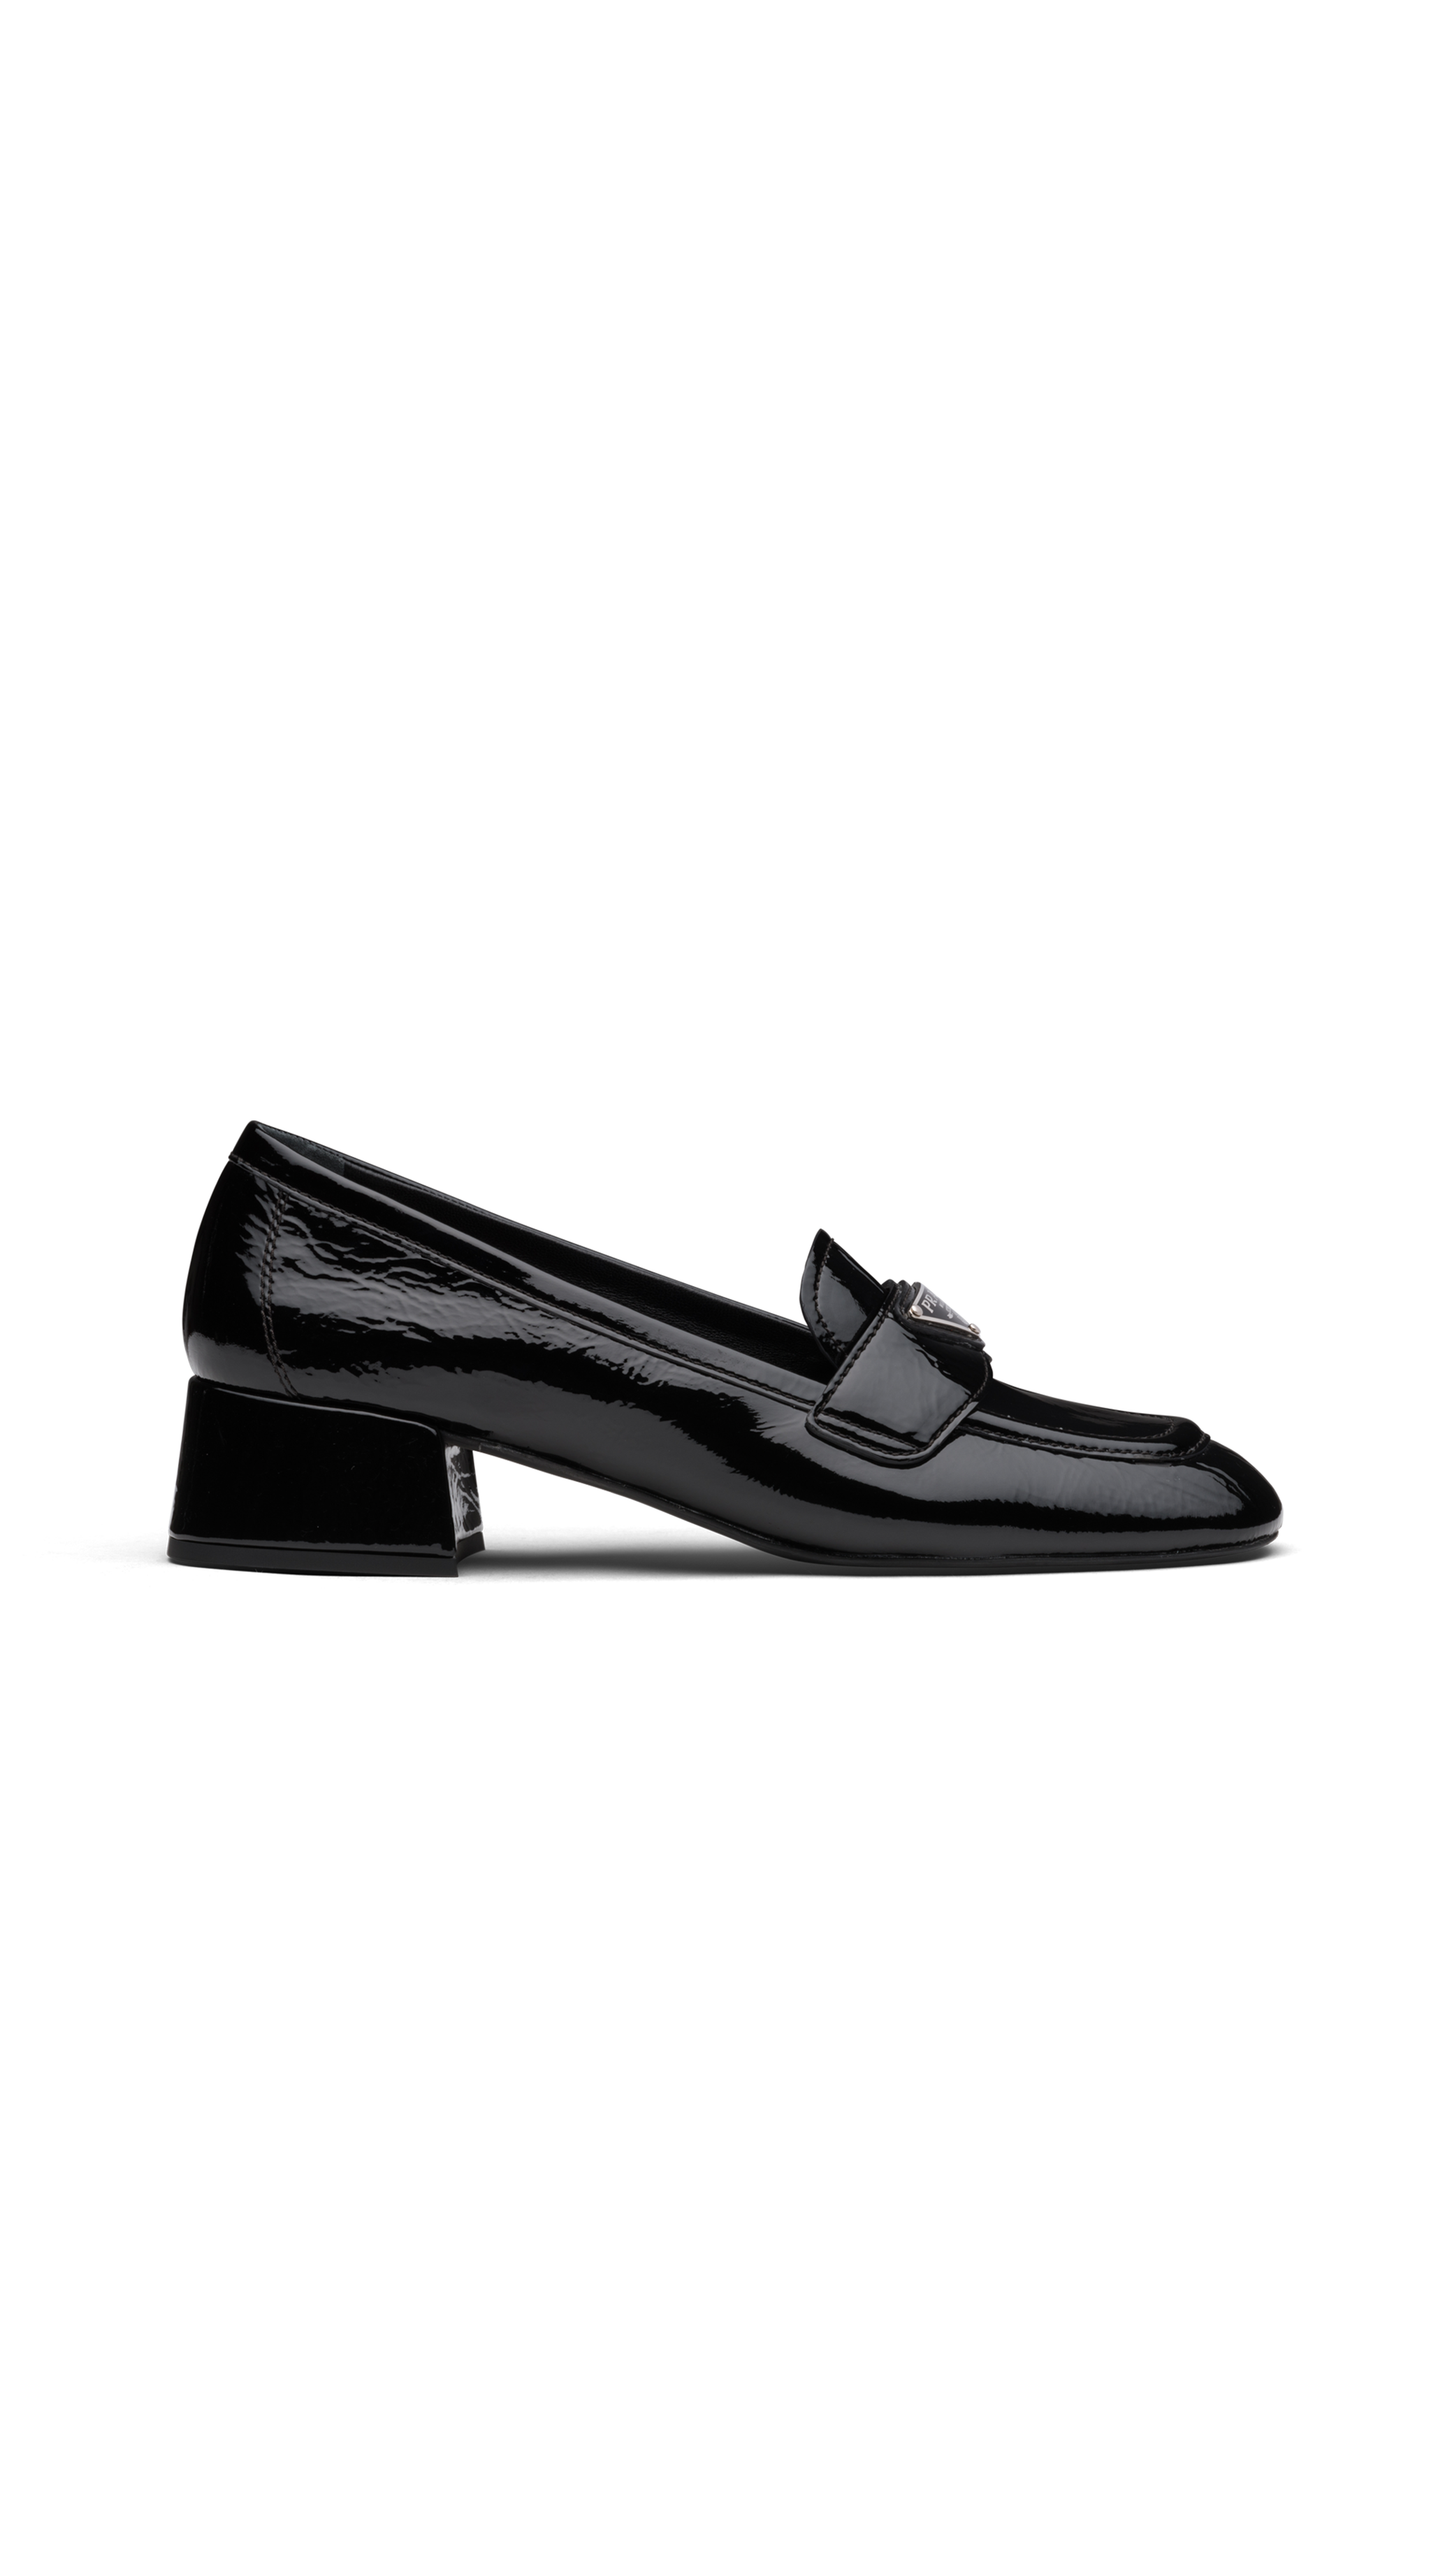 Patent Leather Loafer - Black